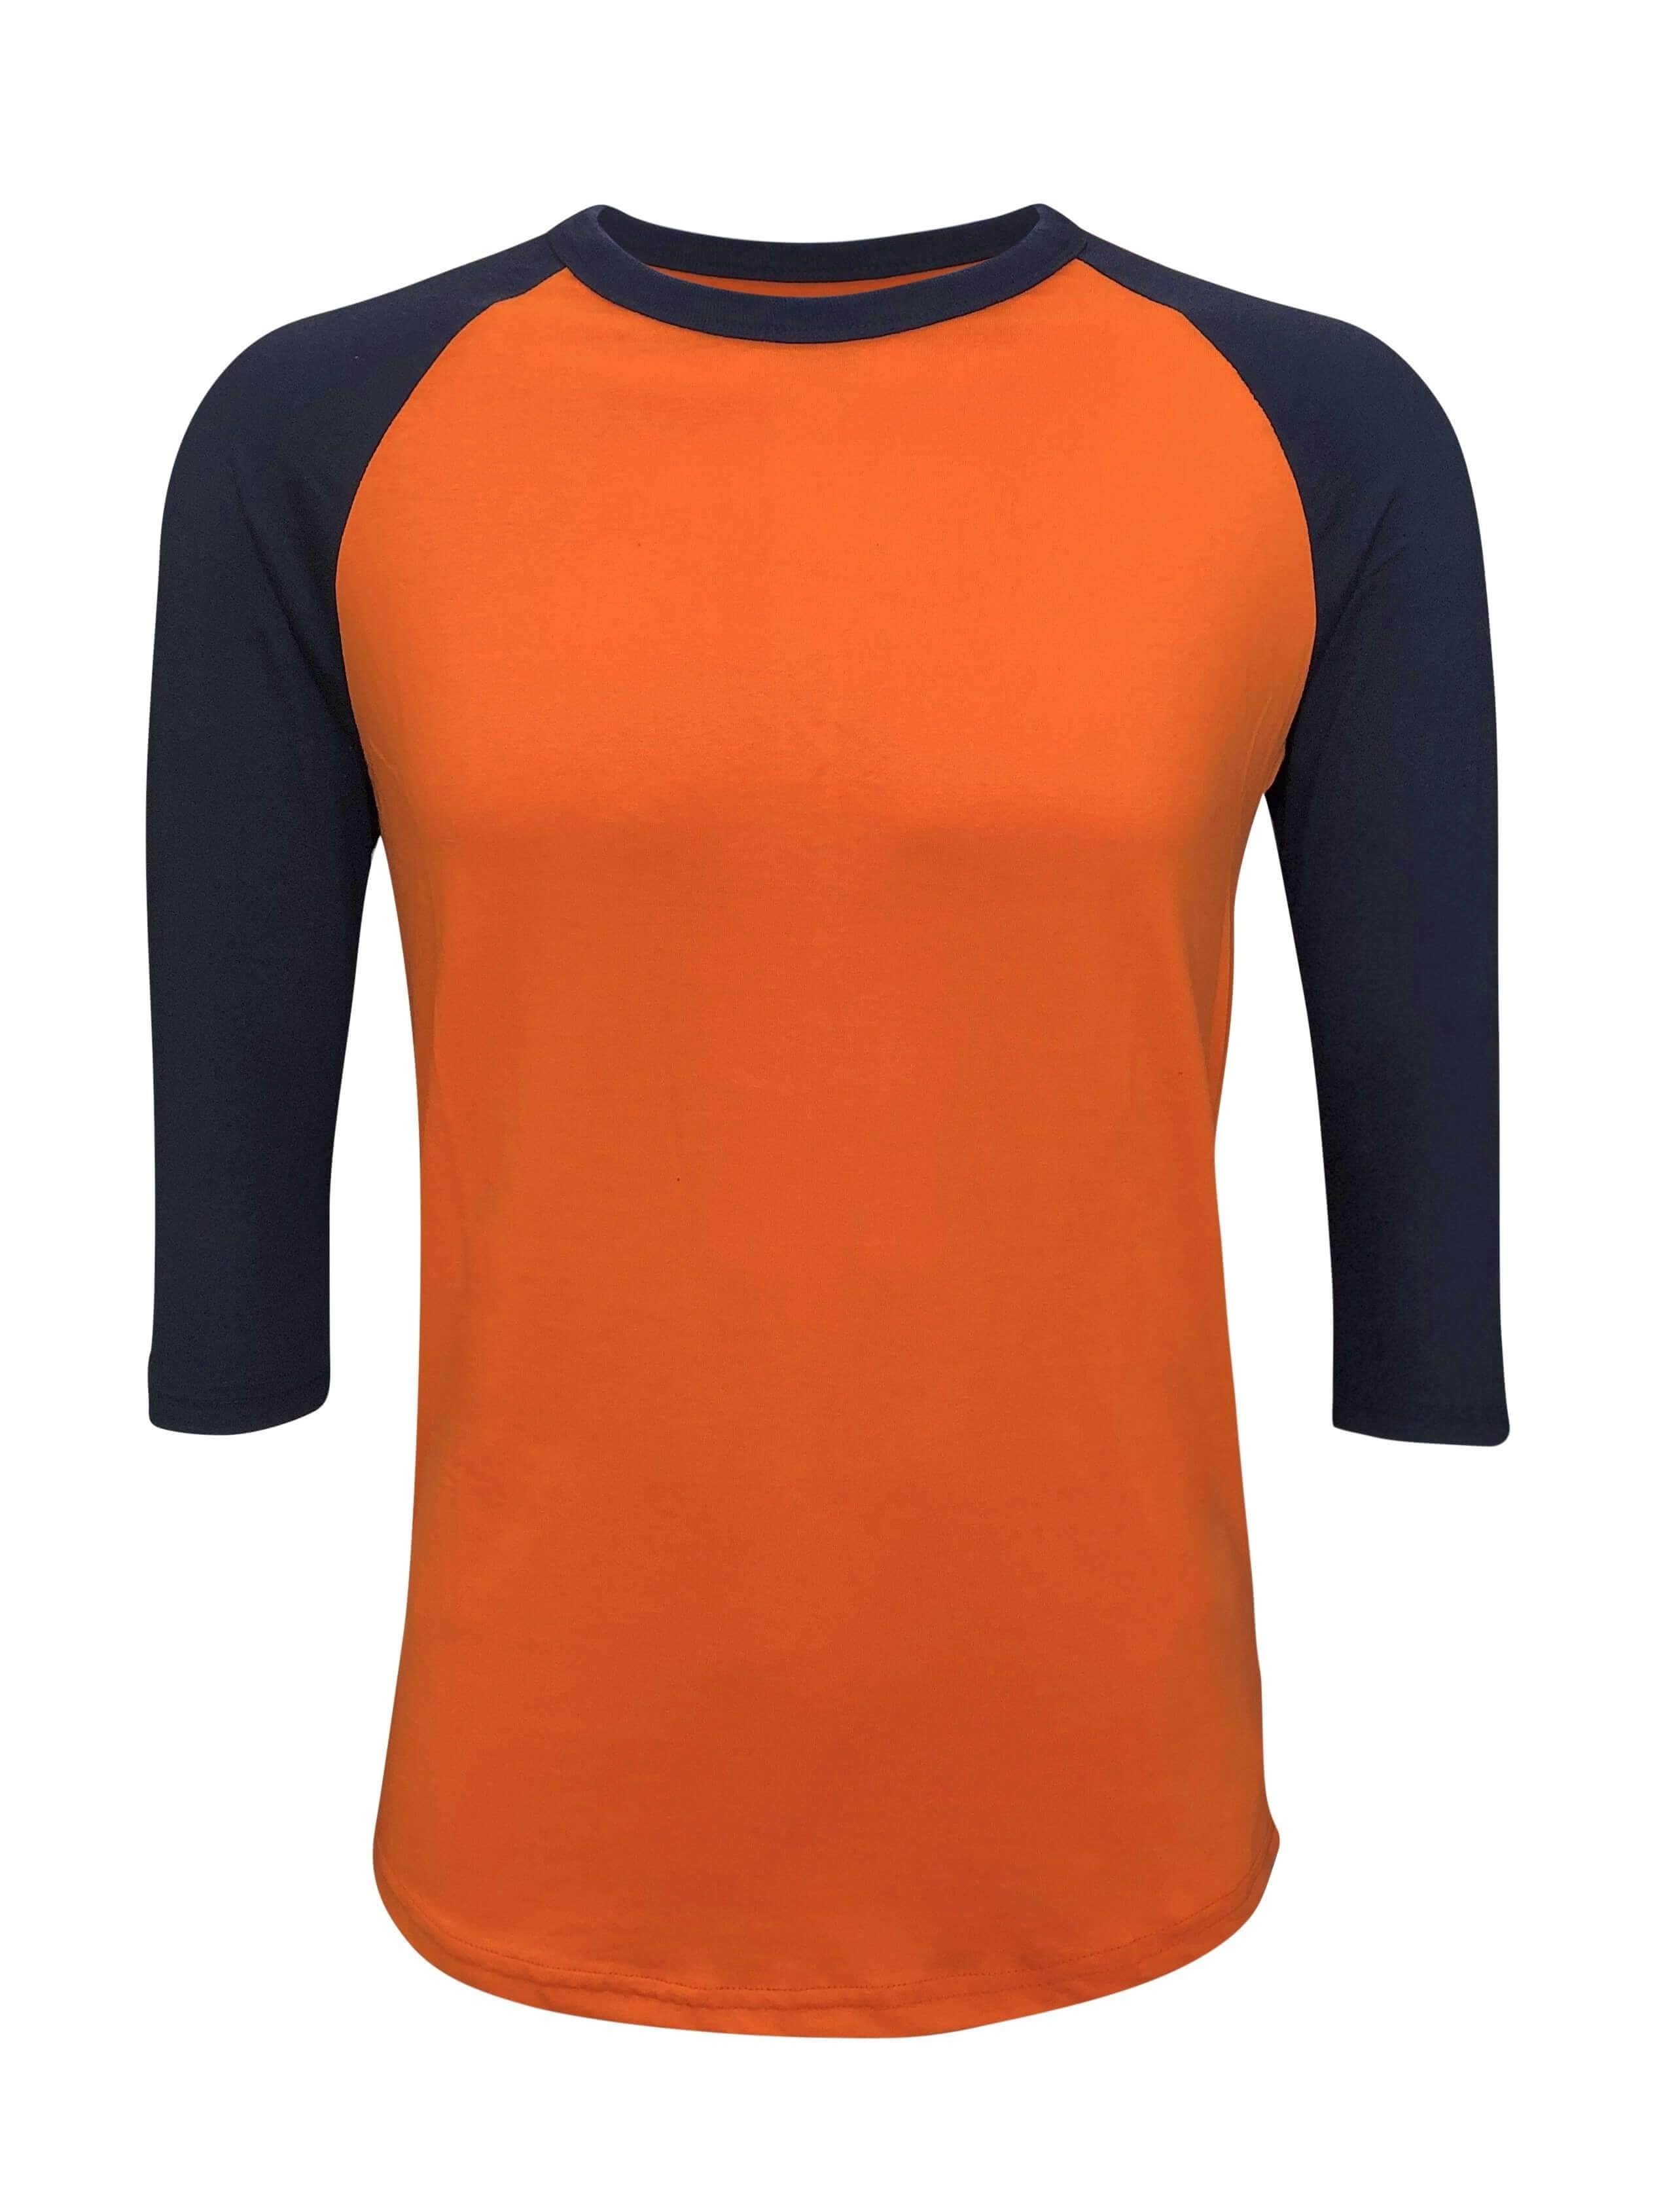 3 Little-Known Facts About the Raglan Shirt – Jupmode